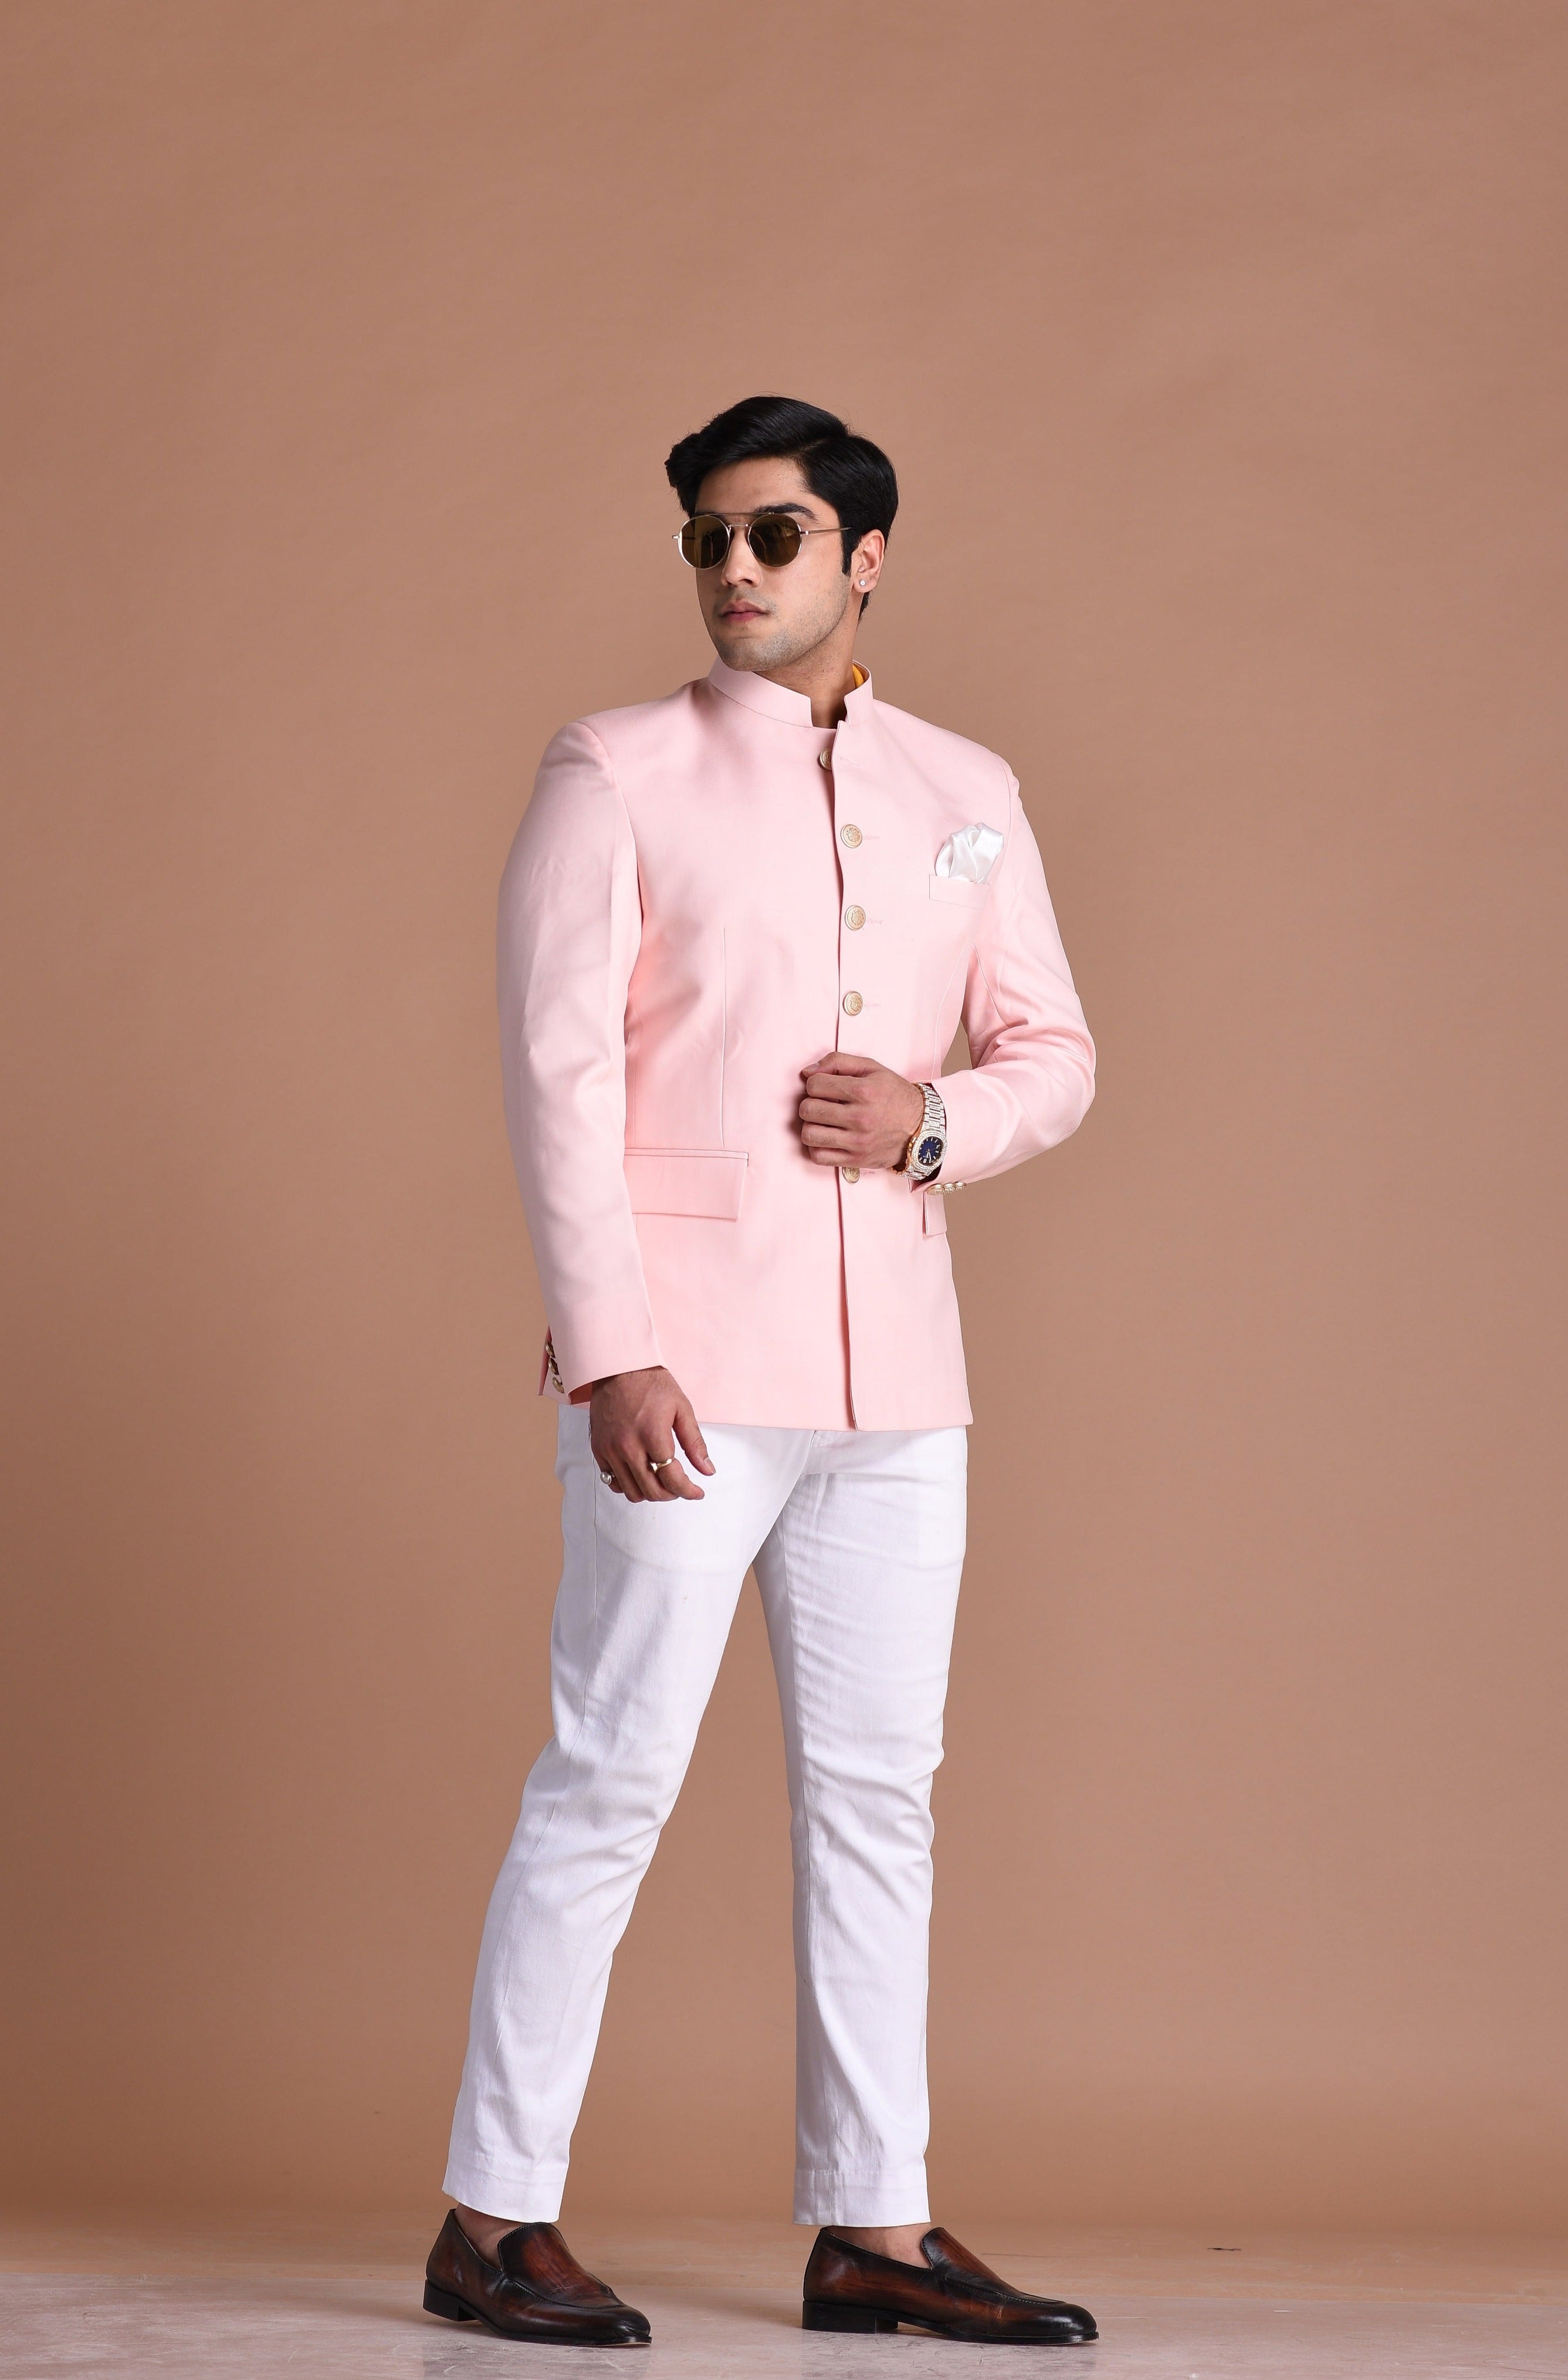 Alluring Light Pink Jodhpuri Bandhgala with White Trouser | Wedding Functions | Perfect for formal Party Wear